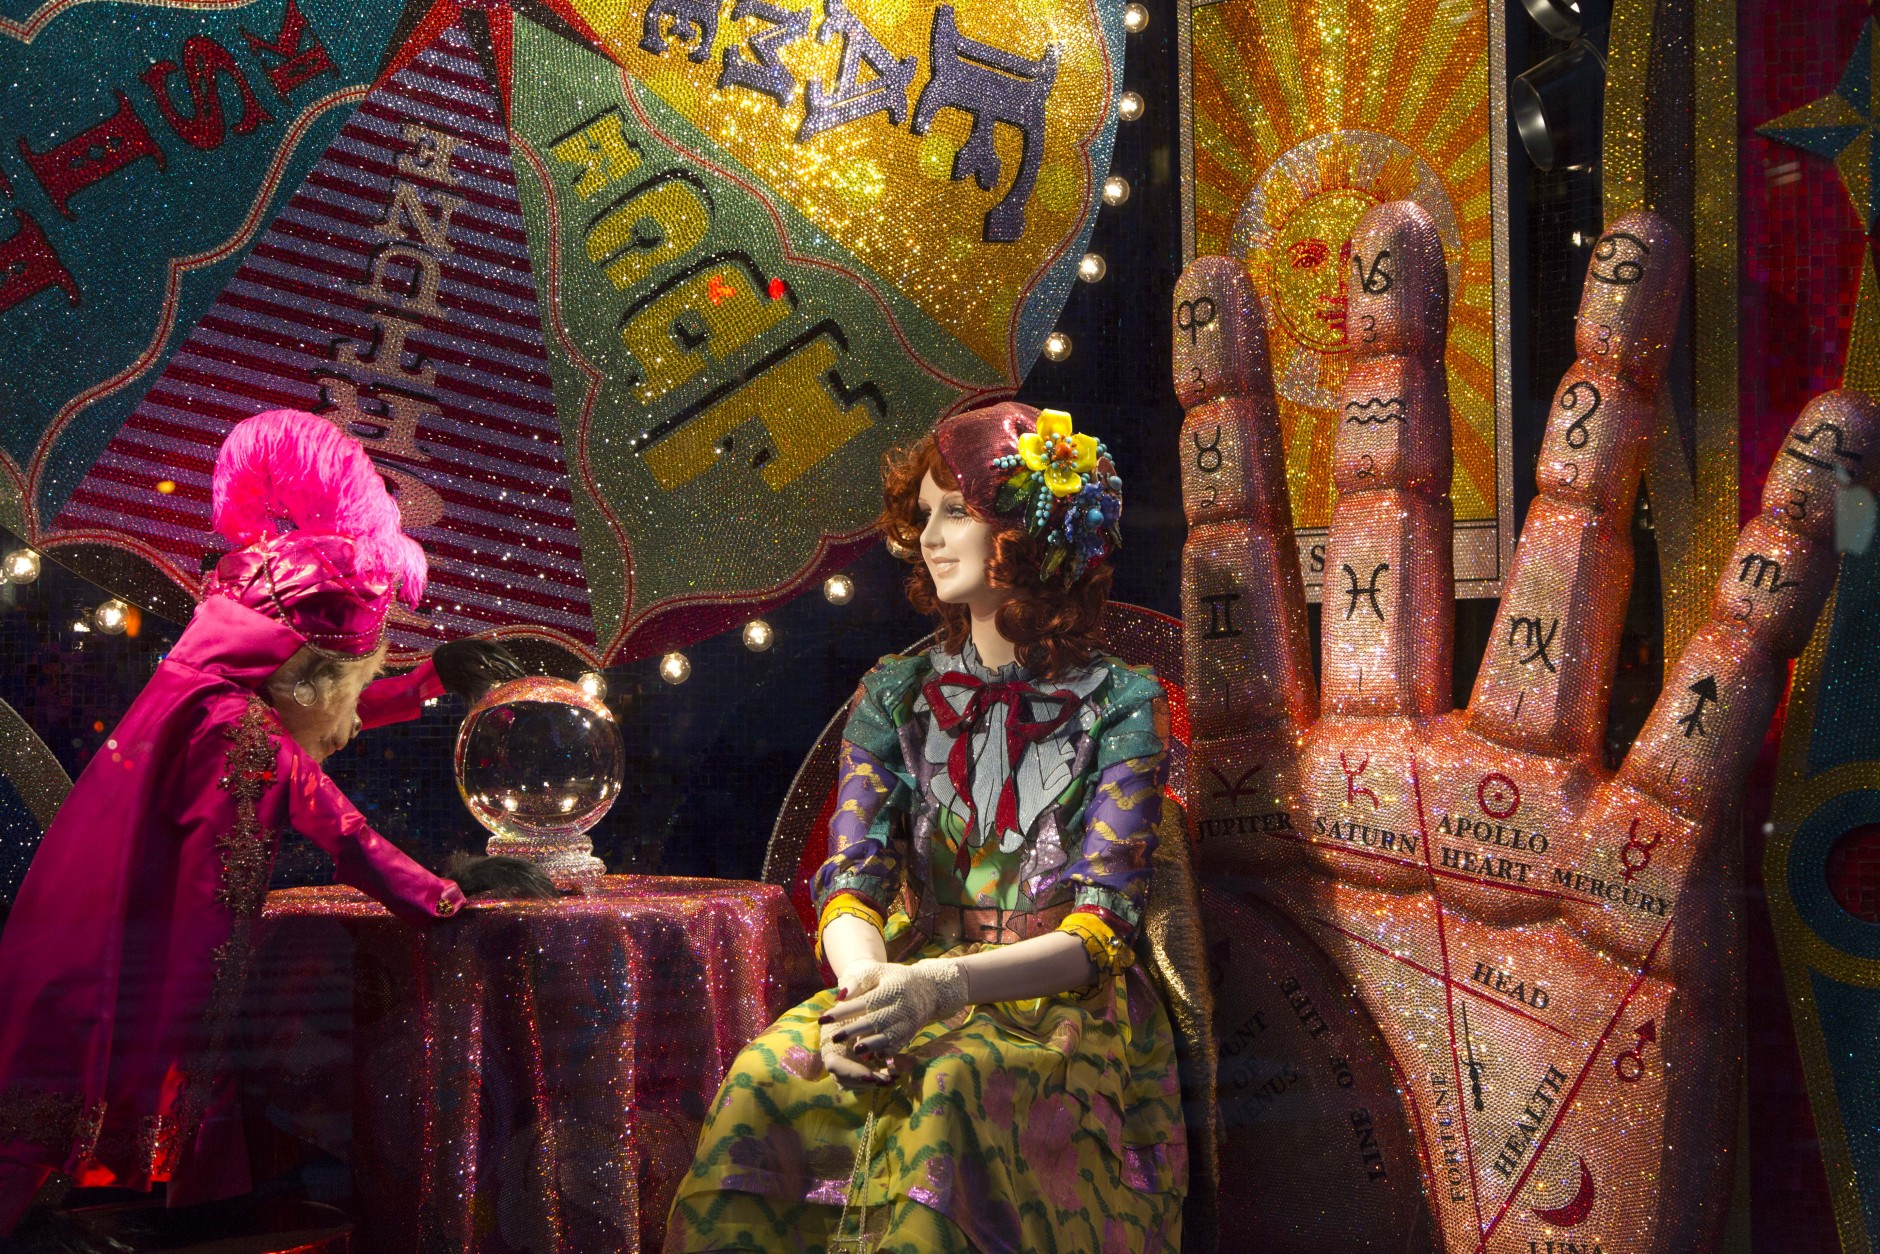 A fortune teller display appears in a holiday window at Bergdorf Goodman, Tuesday, Nov. 24, 2015 in New York. Many New York stores participate in the seasonal ritual of window display pageantry. (AP Photo/Mark Lennihan)